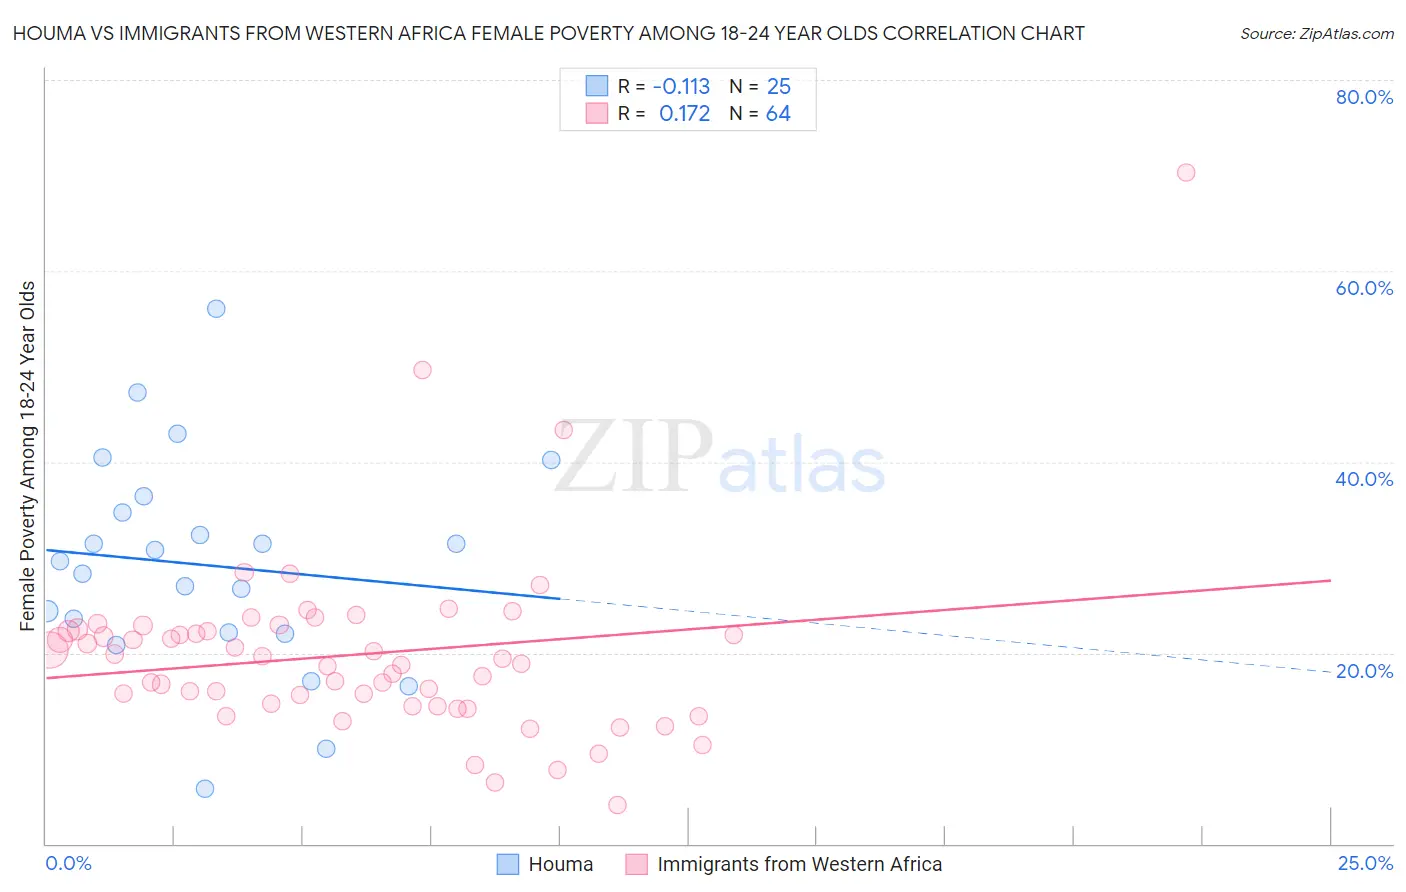 Houma vs Immigrants from Western Africa Female Poverty Among 18-24 Year Olds